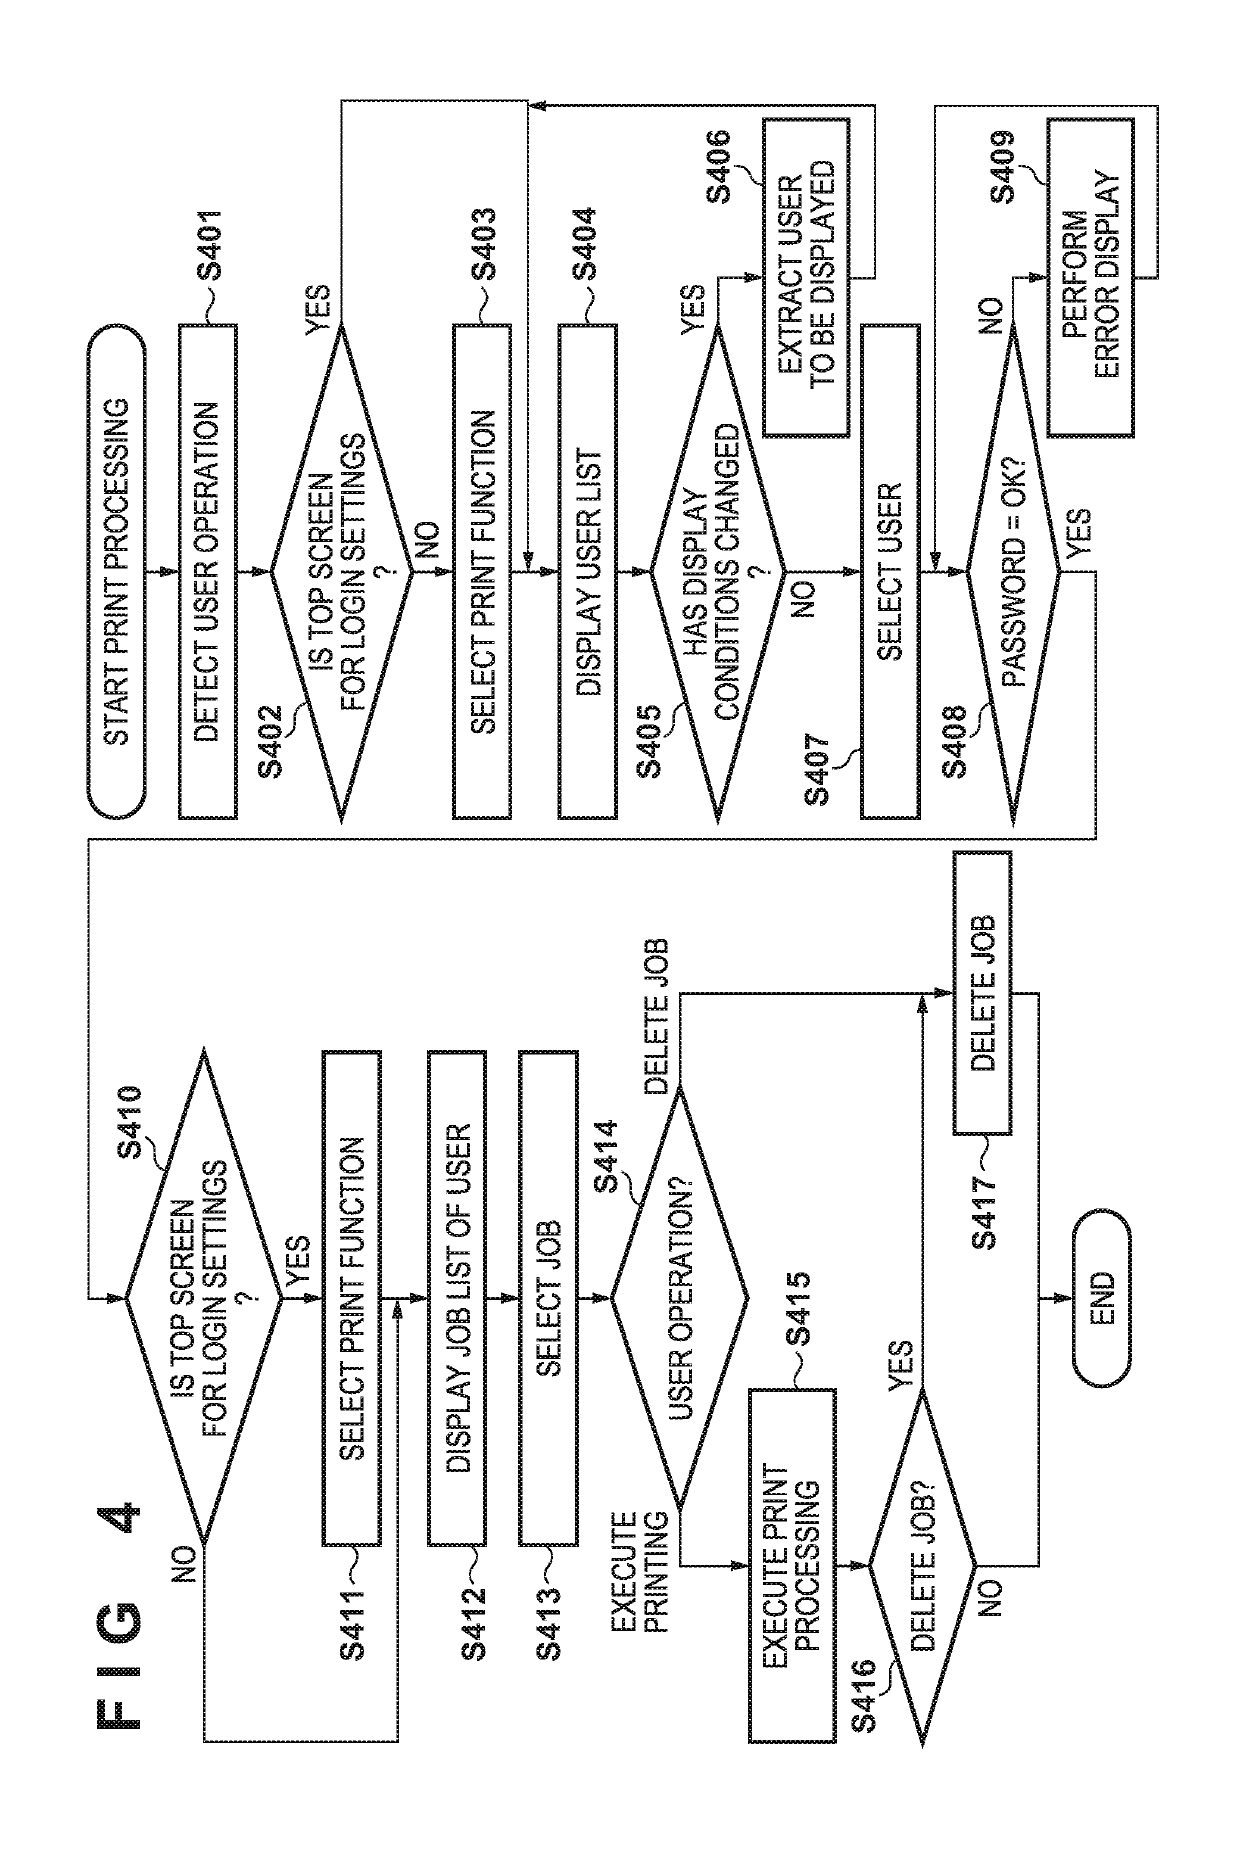 Image forming apparatus that receives bibliographic information including identification information of print data transmitted to other image forming apparatuses and obtains user information associated with the print data, and related display method and non-transitory computer-readable storage medium storing program